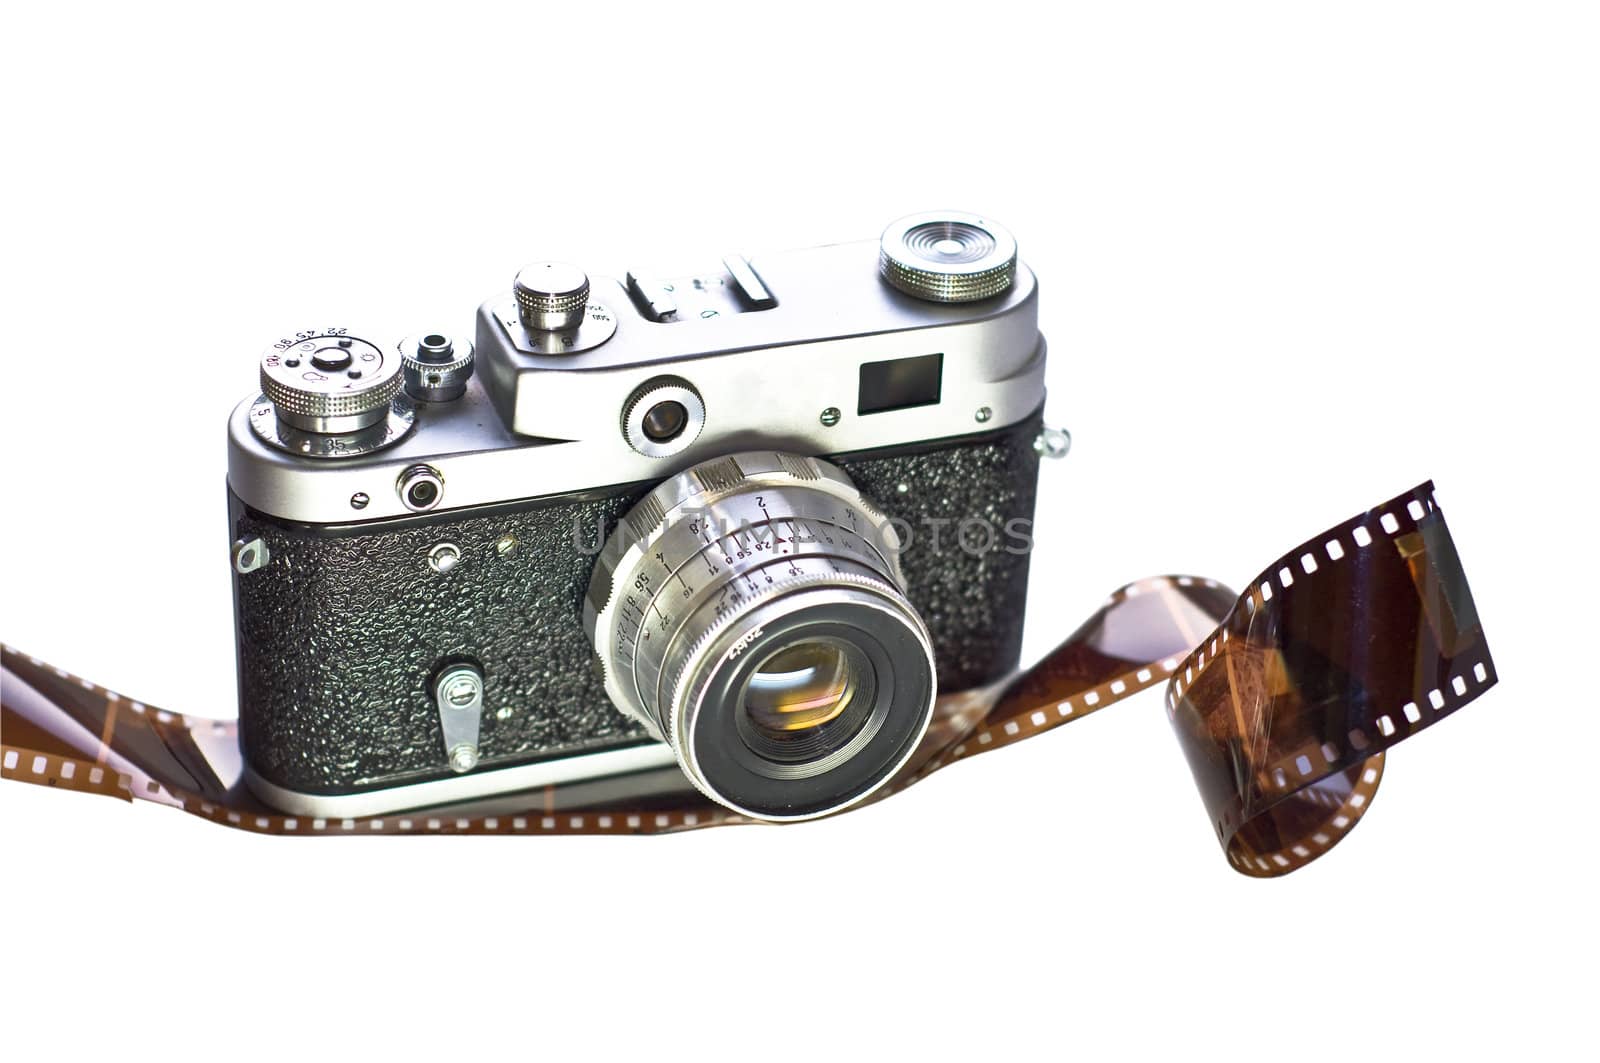 Retro film camera is shown on 35mm film. White background, isolation. Medium-format camera with interchangeable lenses.